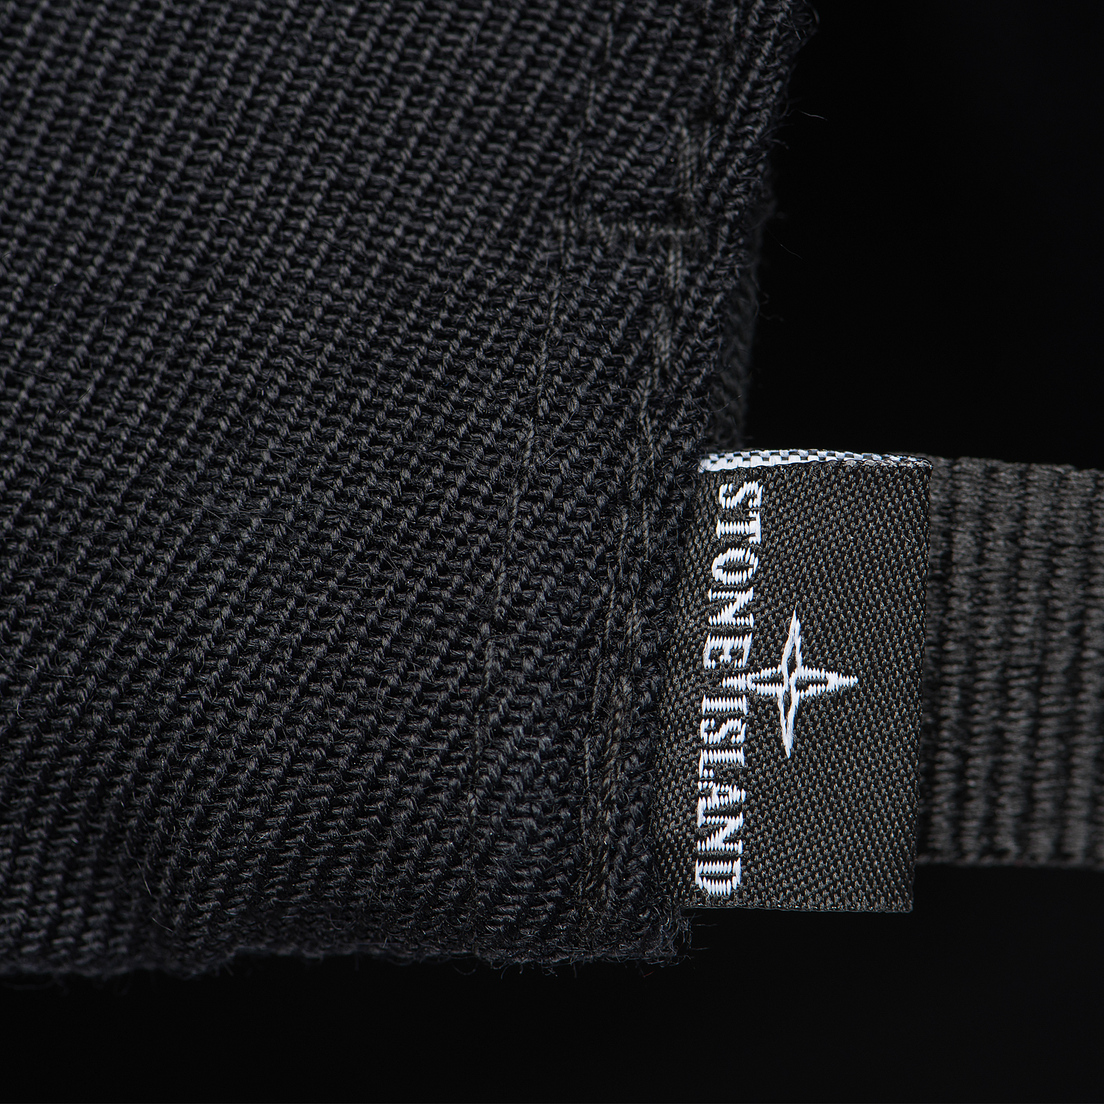 Stone Island Кепка Wool Mix Compass Logo Embroidered